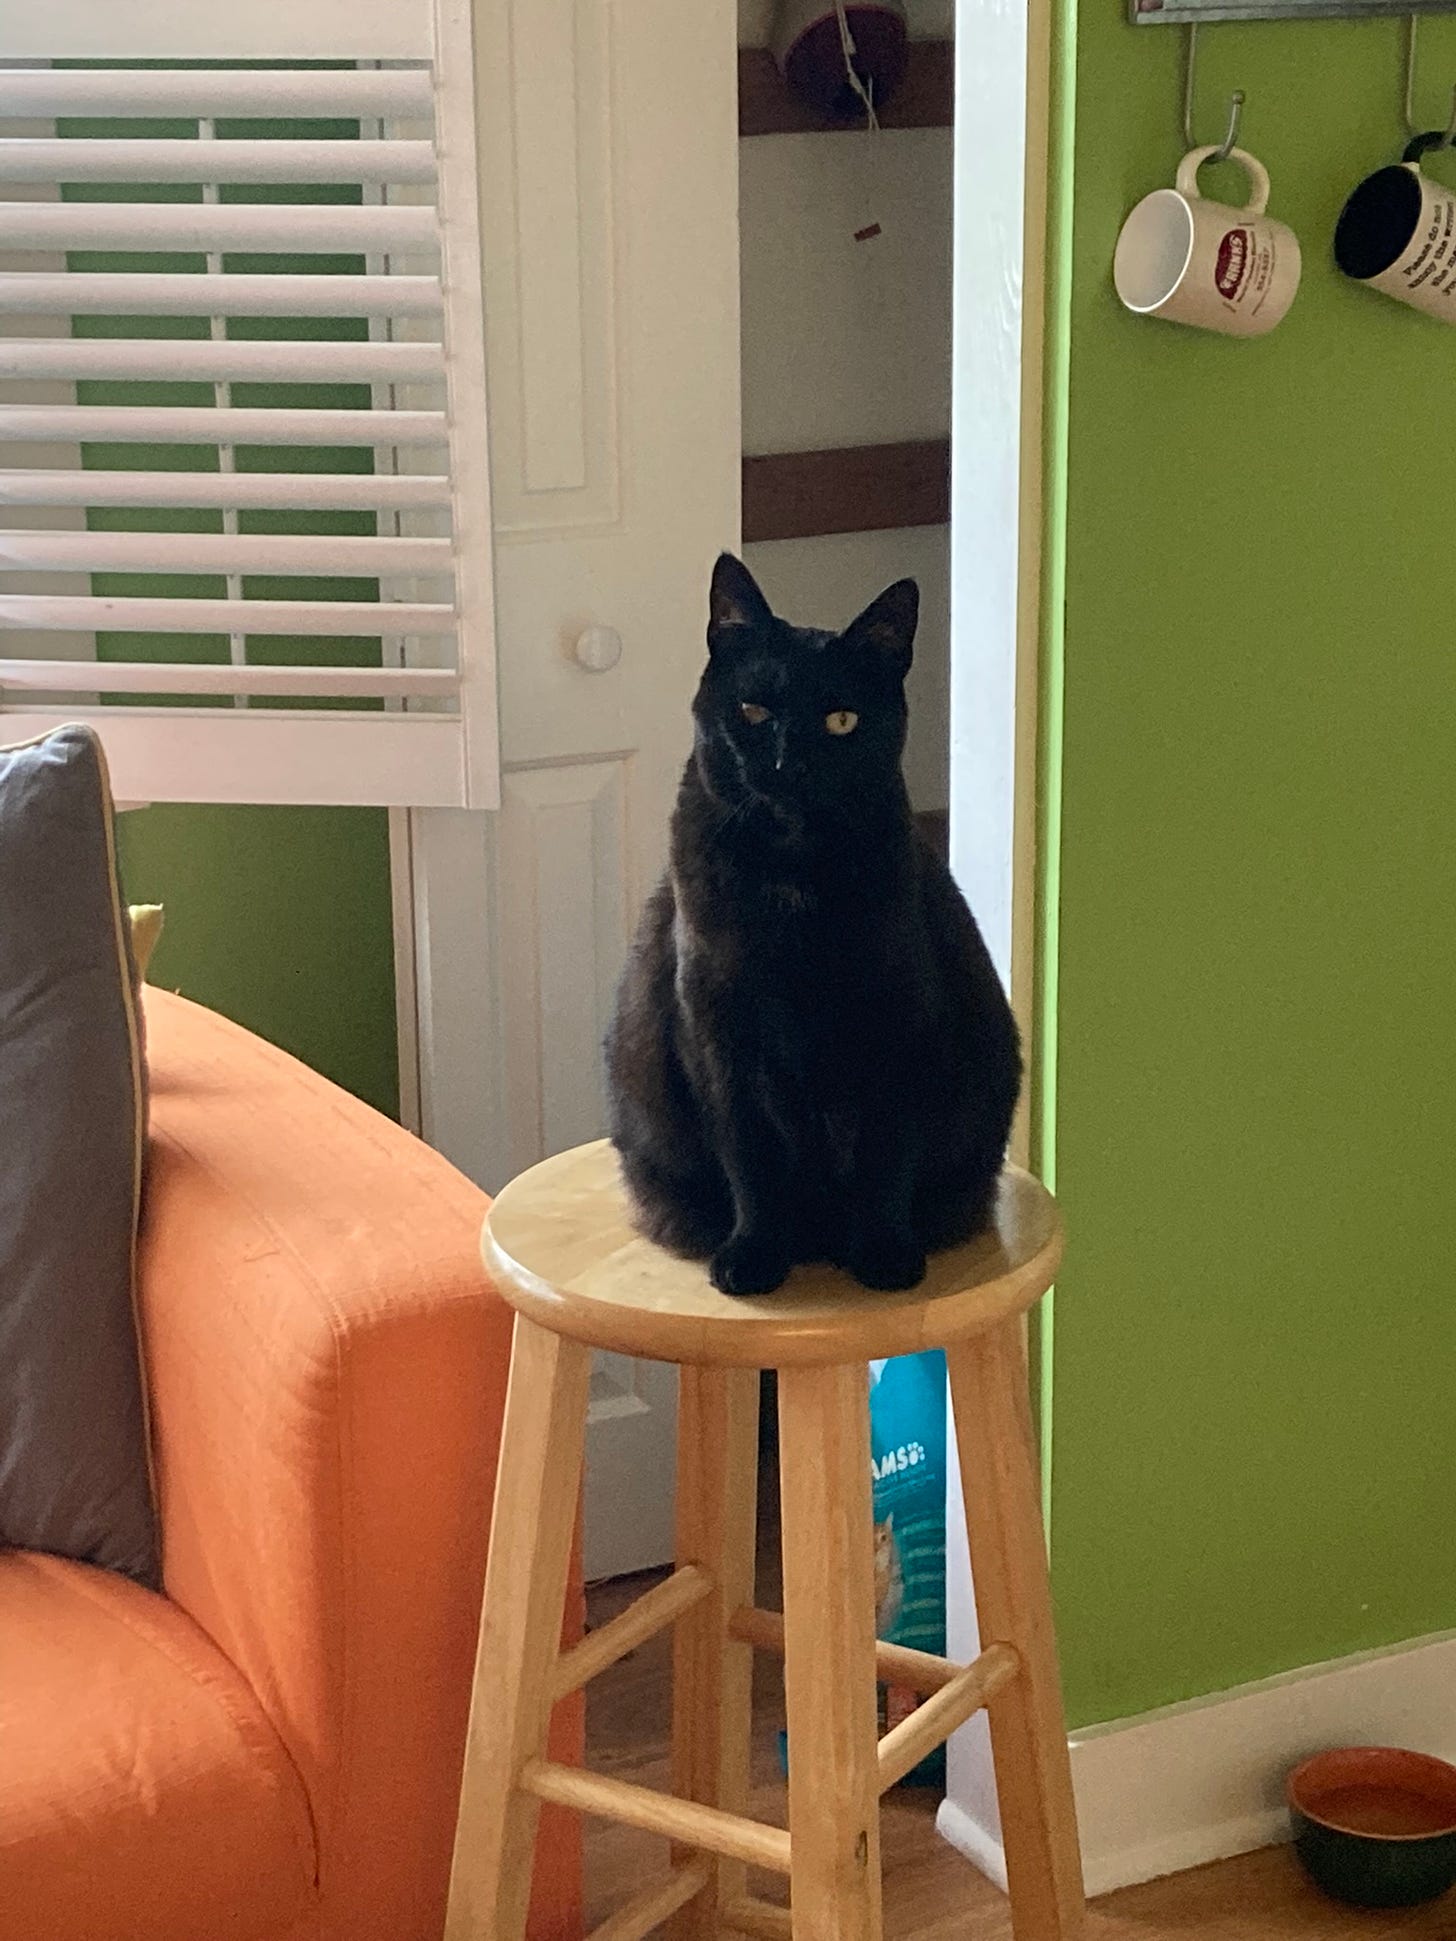 Fat, one-eyed black cat sitting on a stool and looking skeptical.